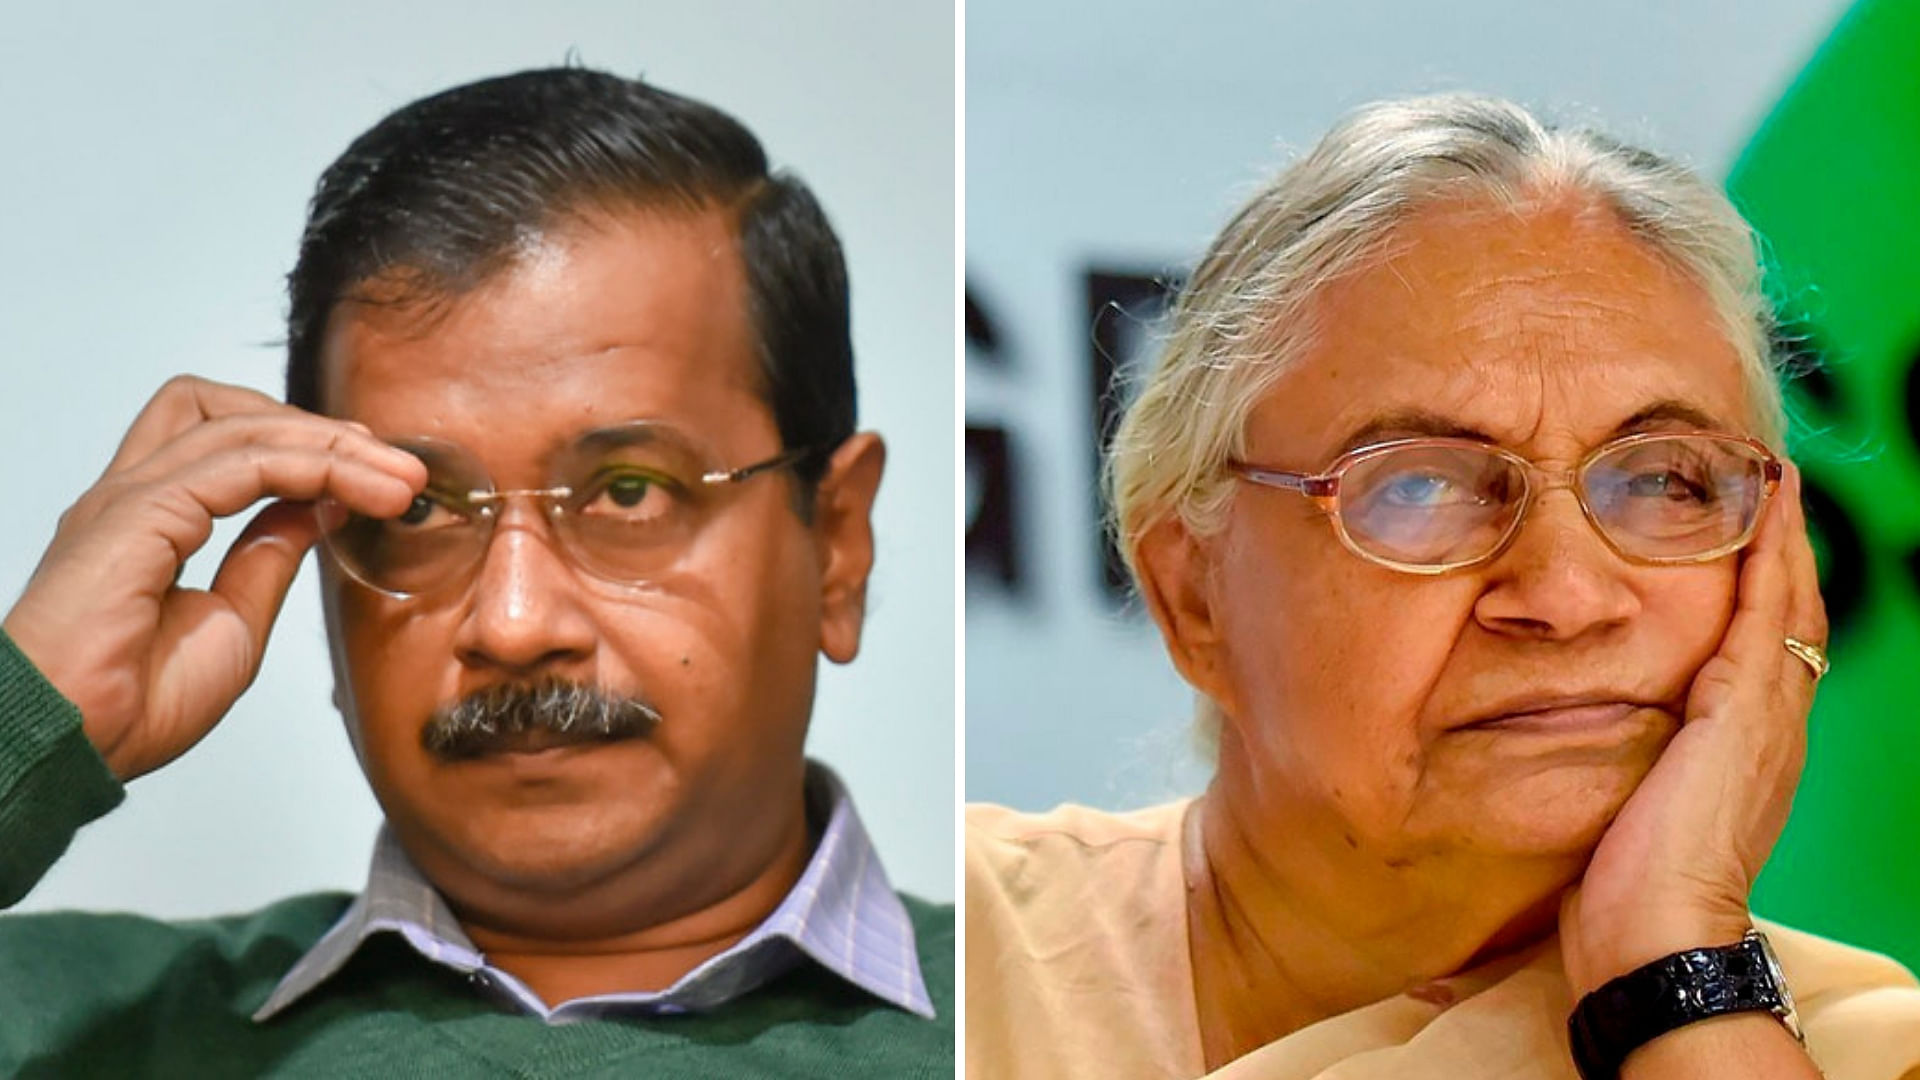 AAP chief Arvind Kejriwal and Congress Chief Sheila Dikshit exchange tweets over rumours regarding the latter’s health.